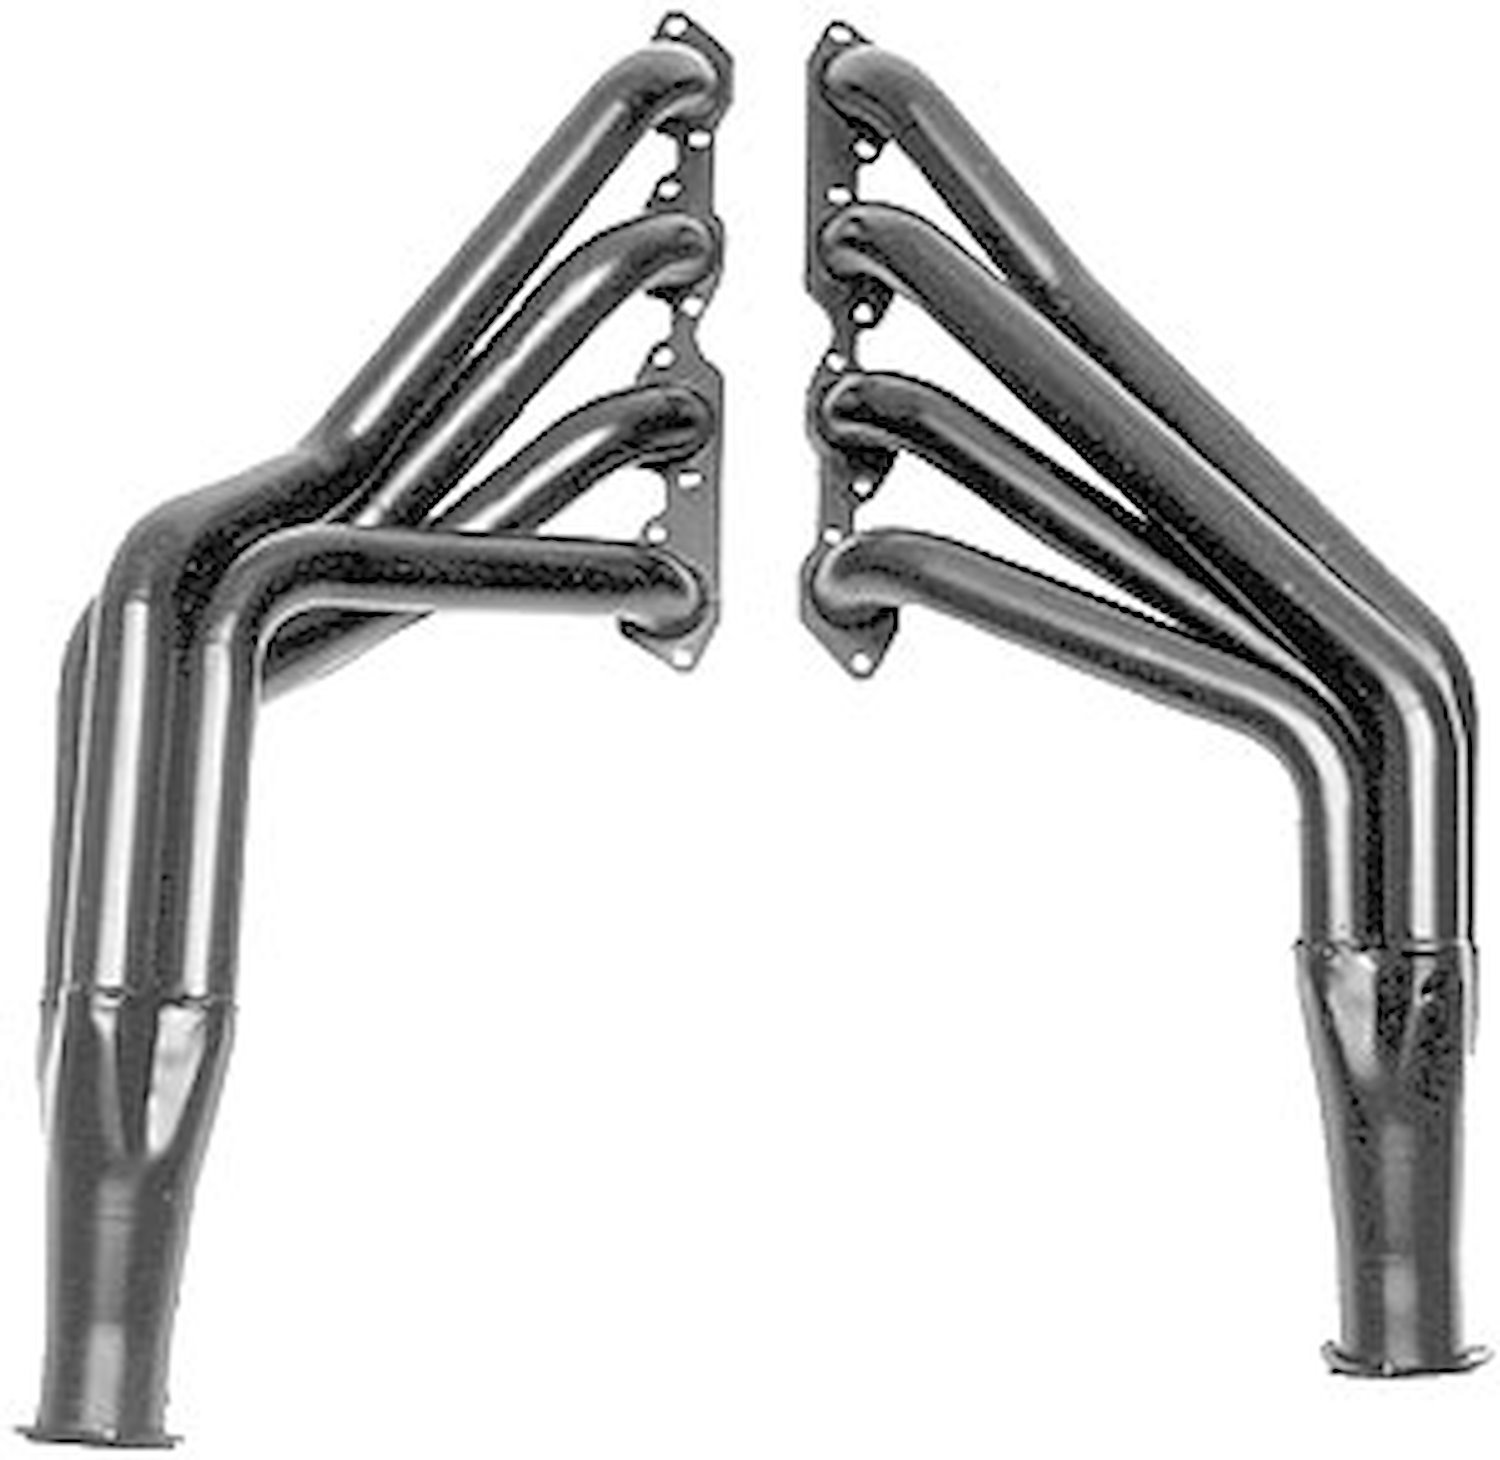 Standard Duty Uncoated Headers for 1967-69 Chevy Camaro